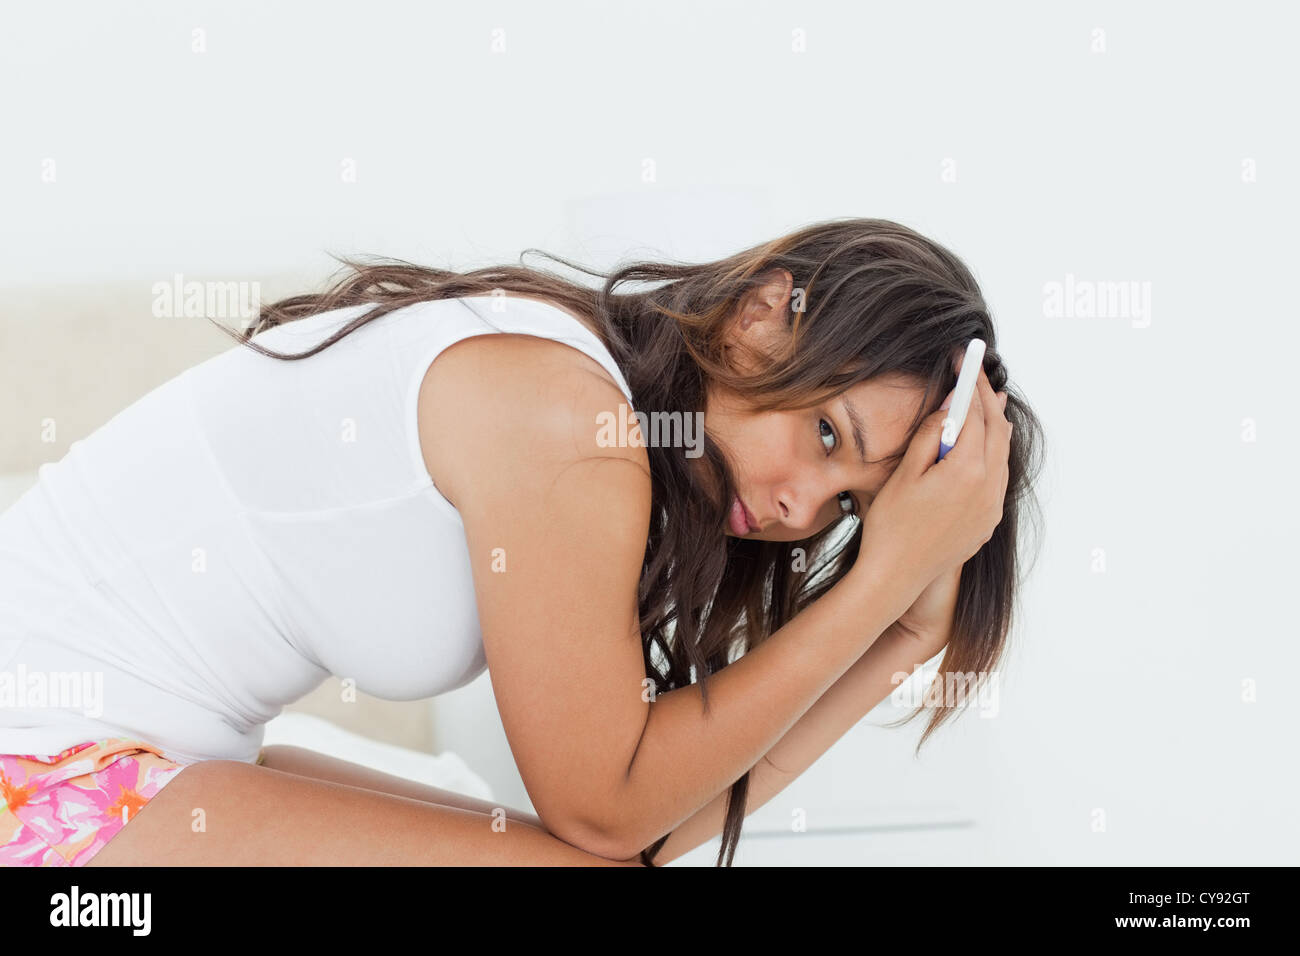 Sad young woman holding a pregnancy test Stock Photo